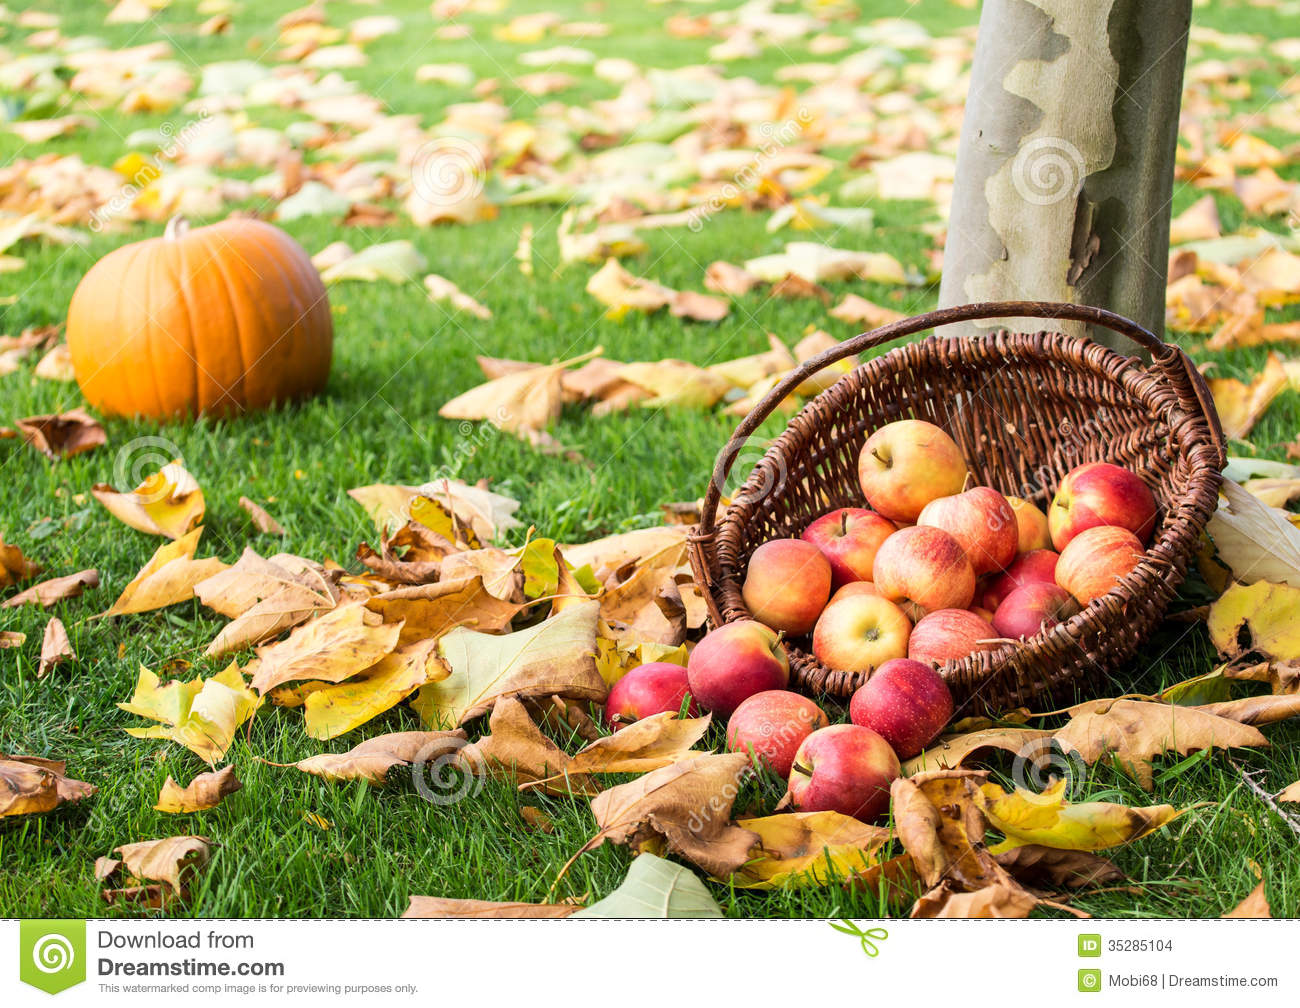 Apple Picking Stock Images   Image  35285104